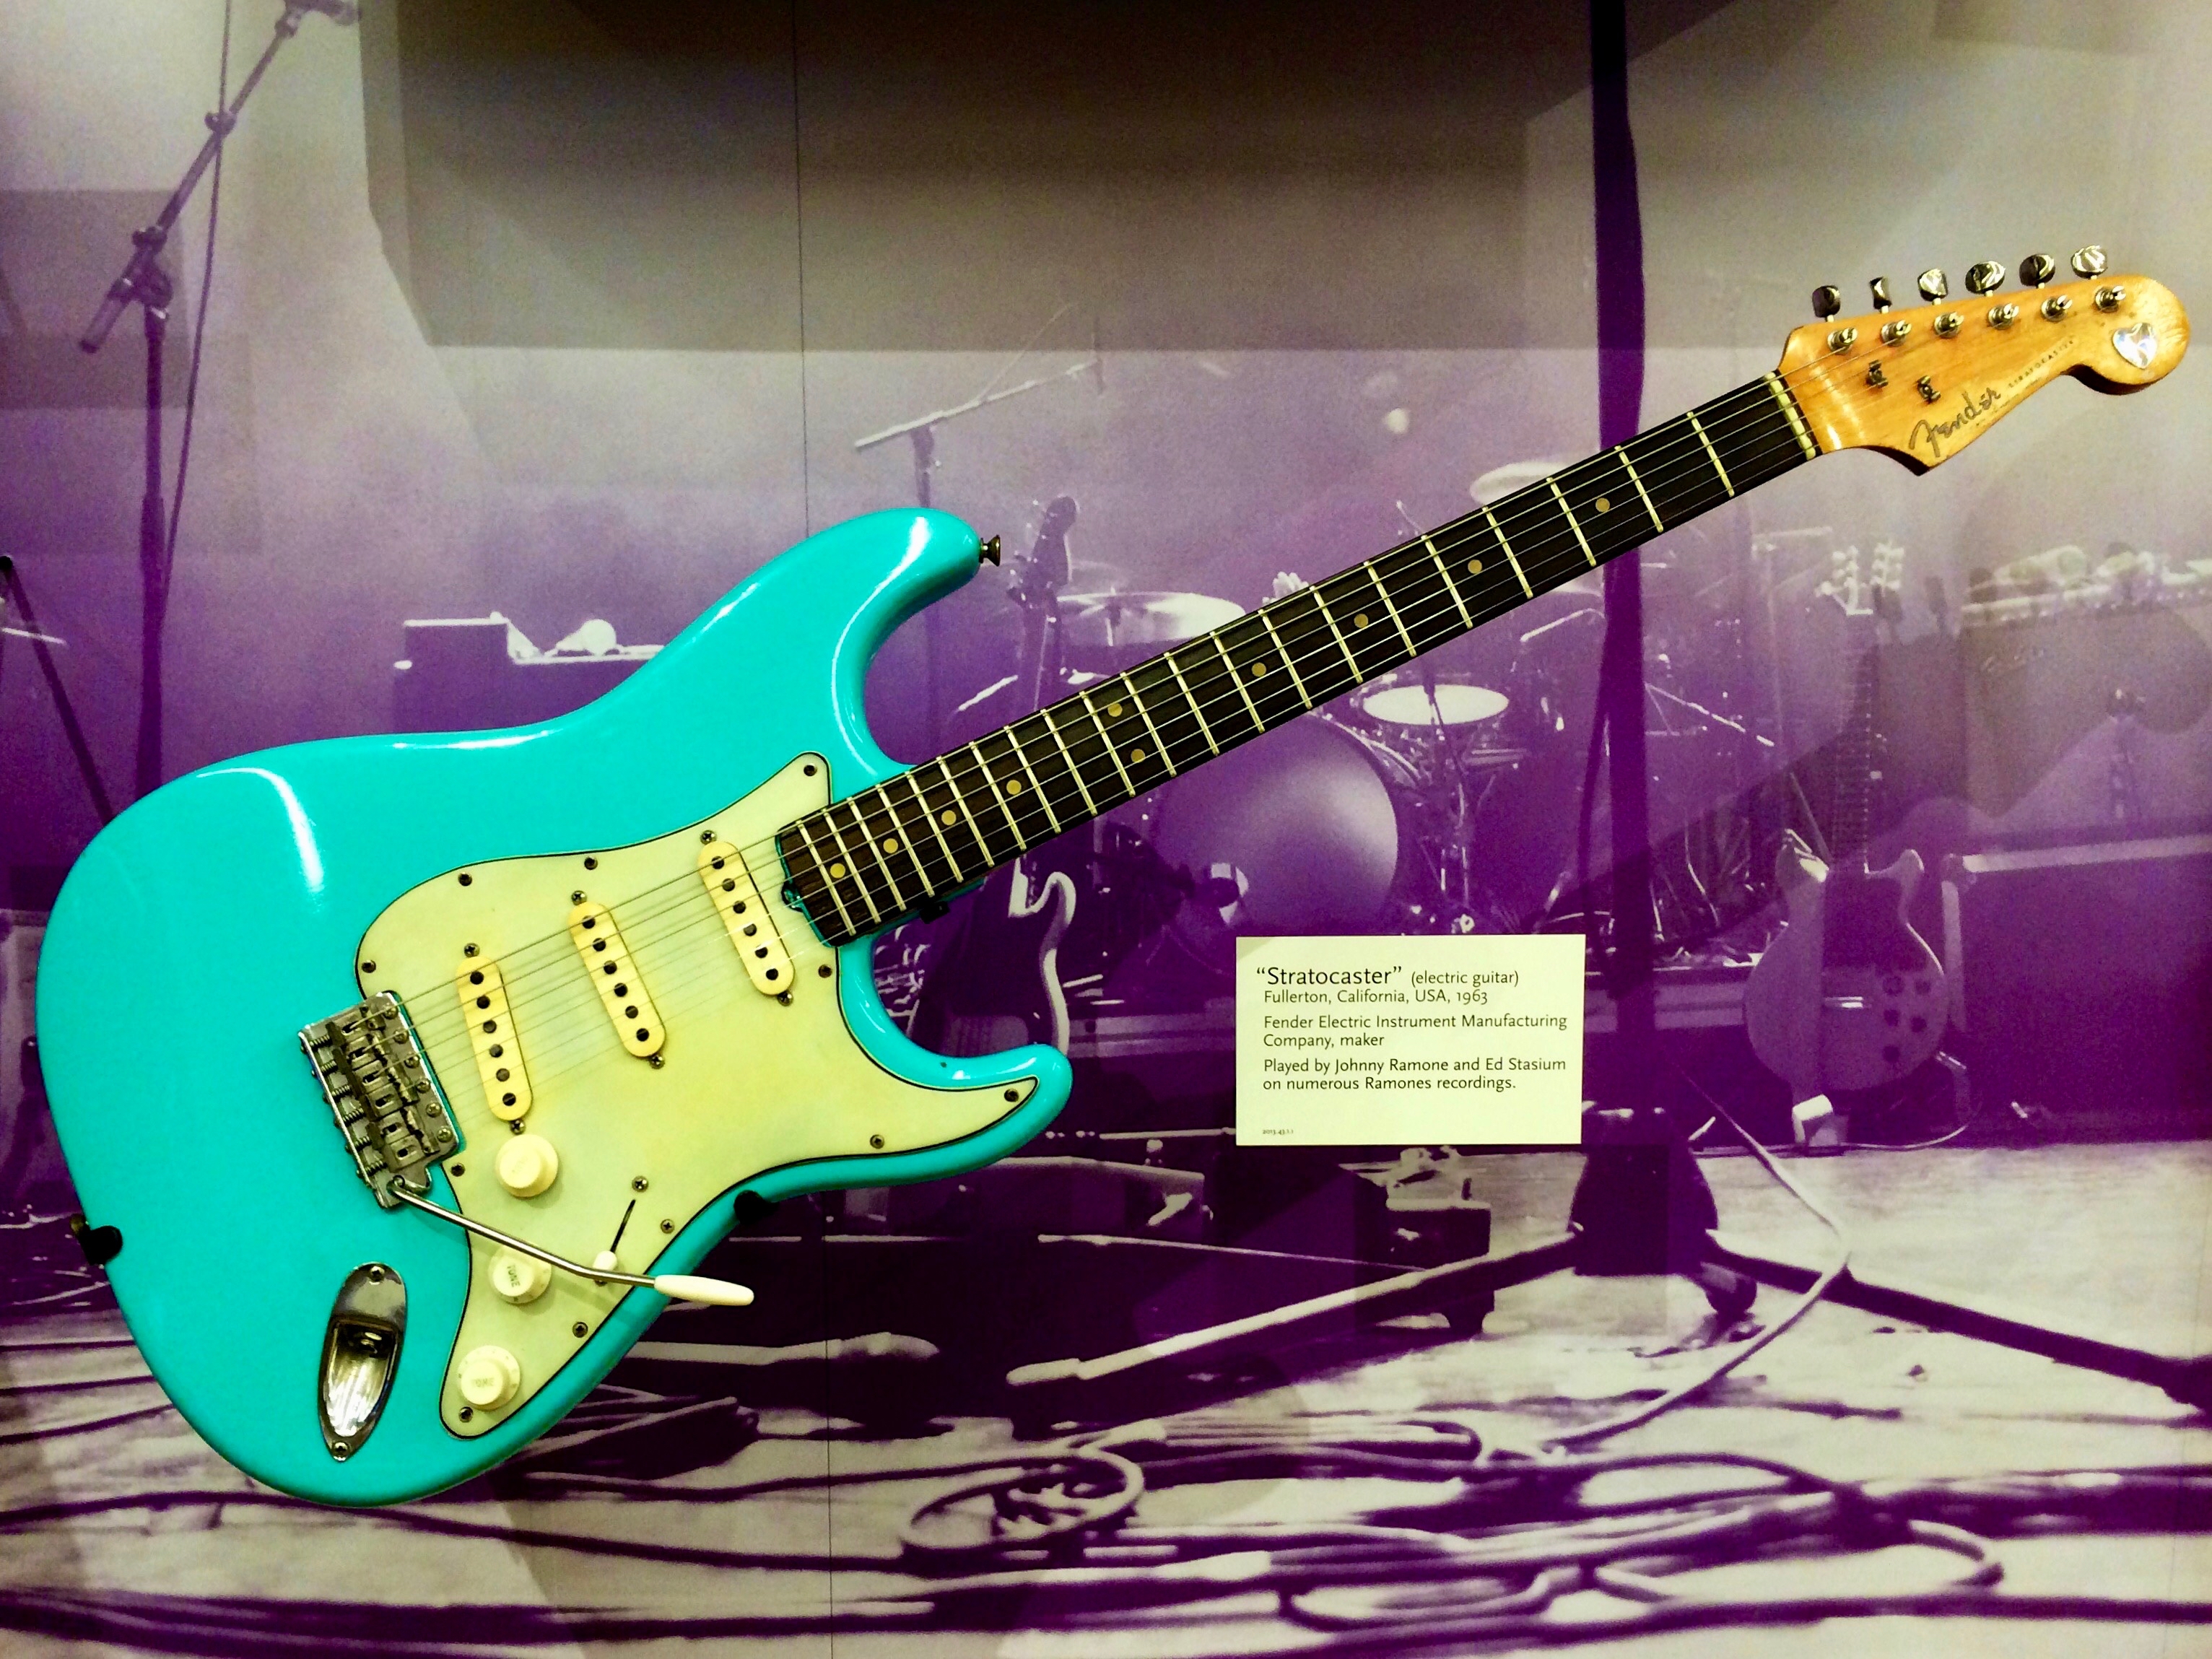 Ed's 1963 Stratocaster on display at the Musical Instrument Museum Phoenix source: edstasium.com